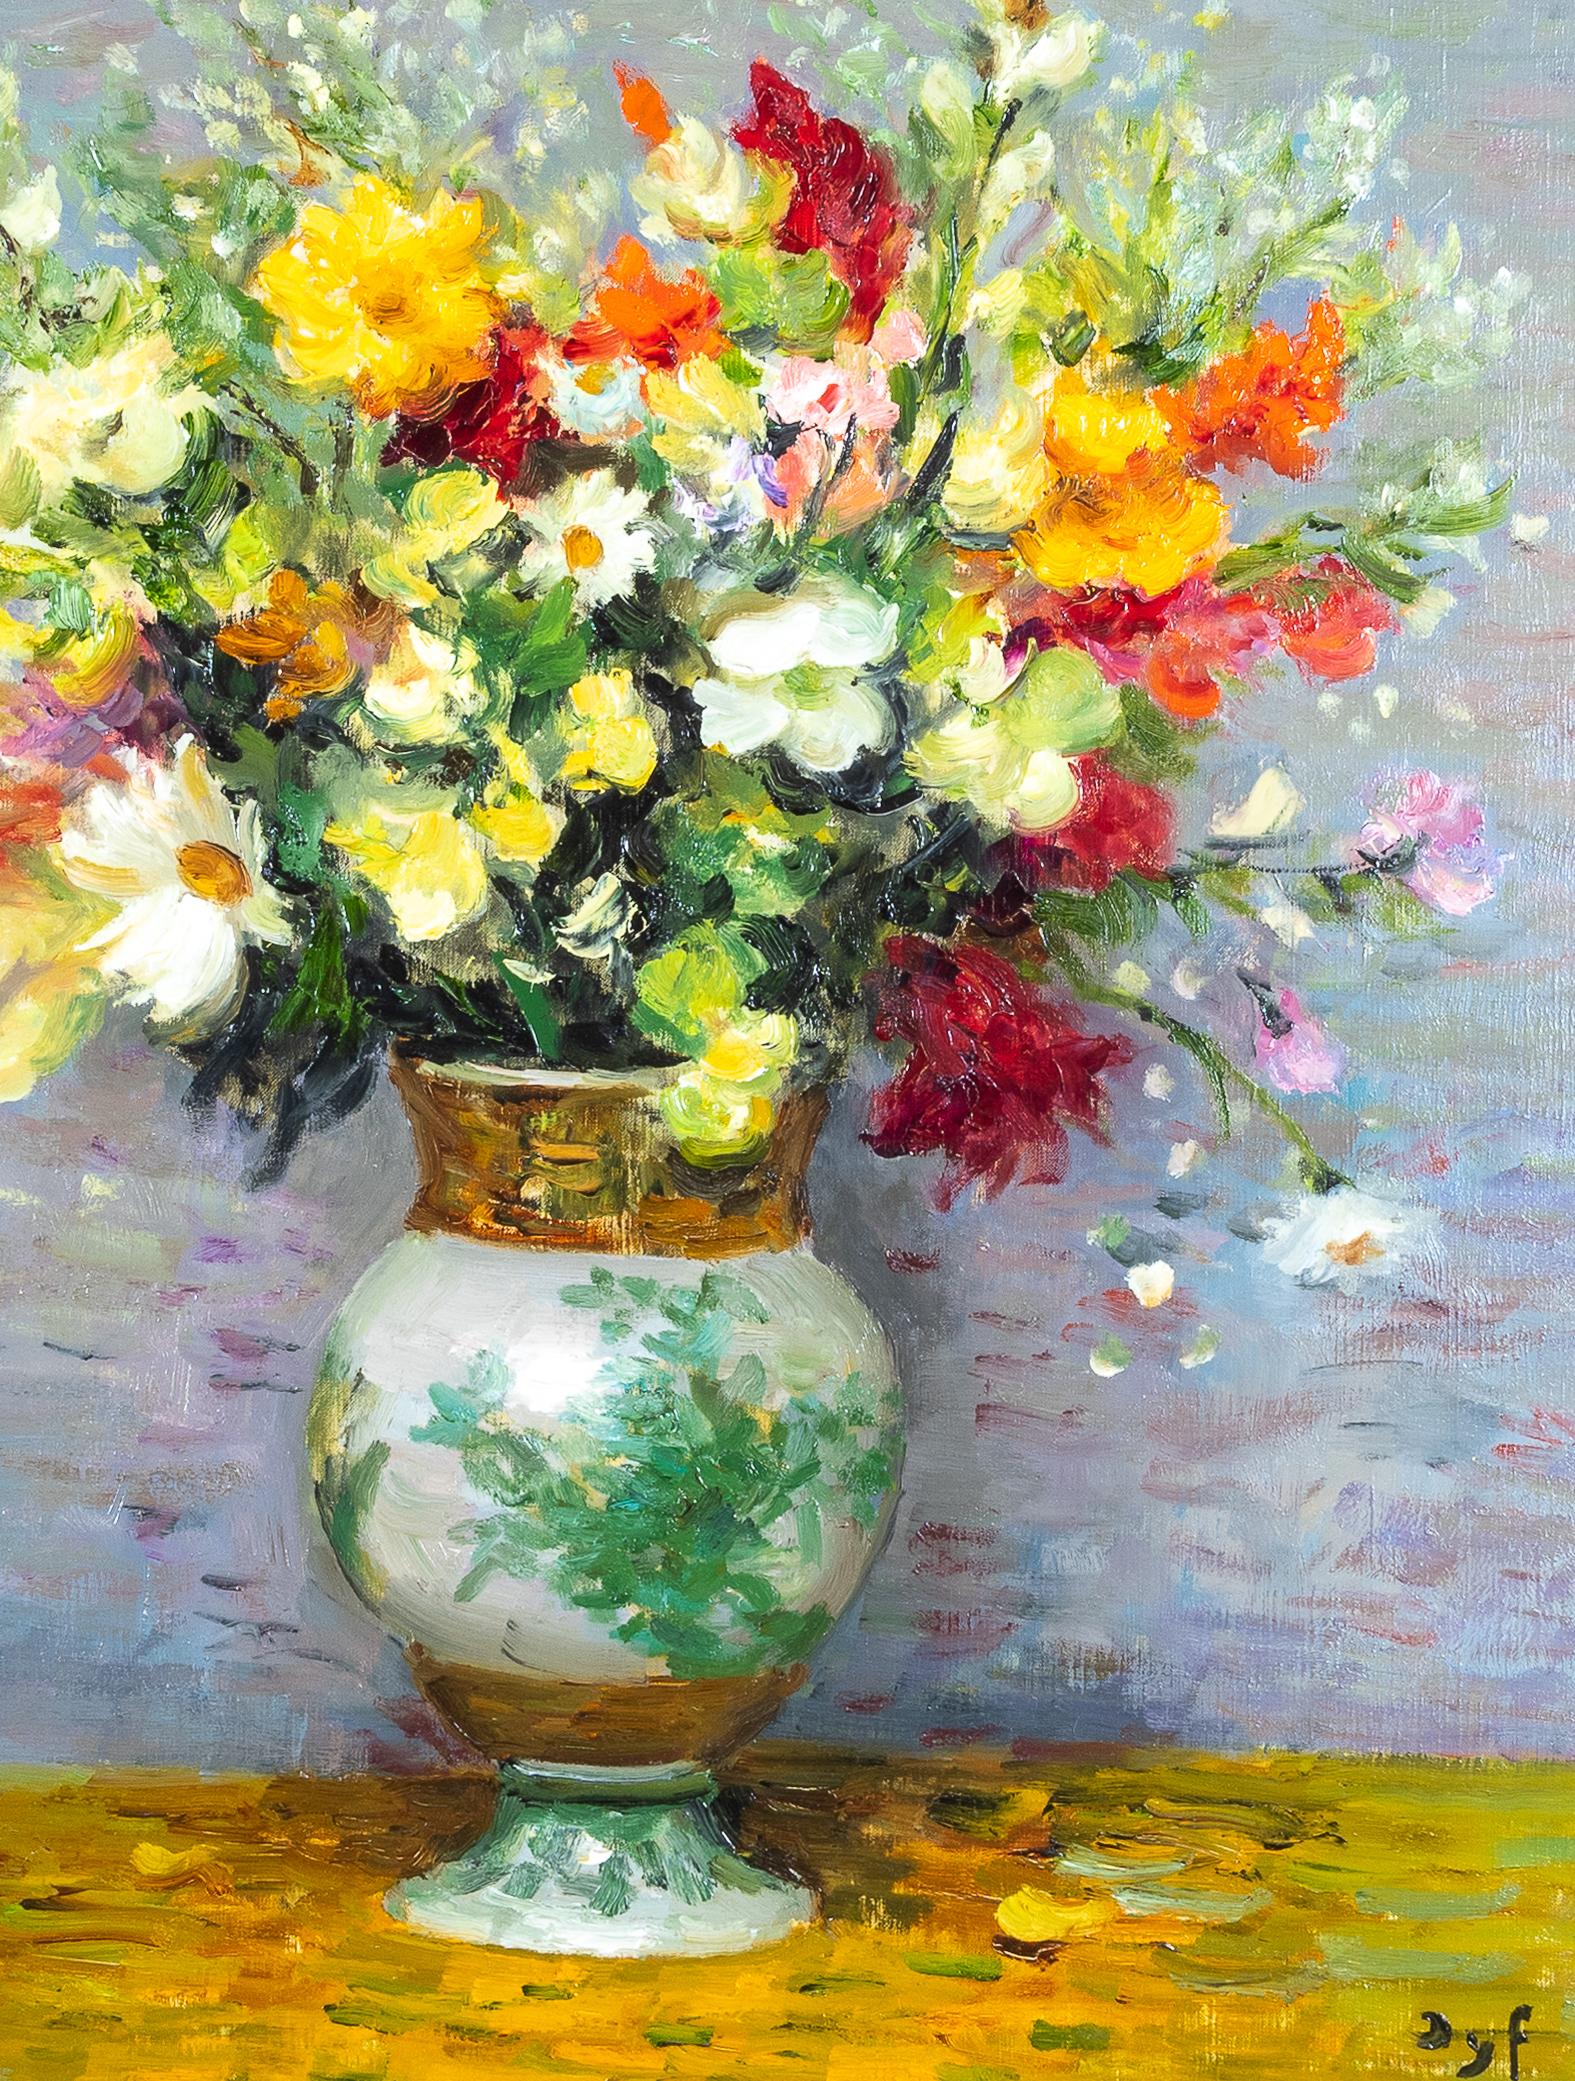 'Summer Bouquet' by Marcel Dyf. A beautiful floral still life painting of orange, yellow, red and white flowers
  
To watch Dyf paint was entrancing. Even as an old man, he would stand rather than sit before the easel, working with extraordinary